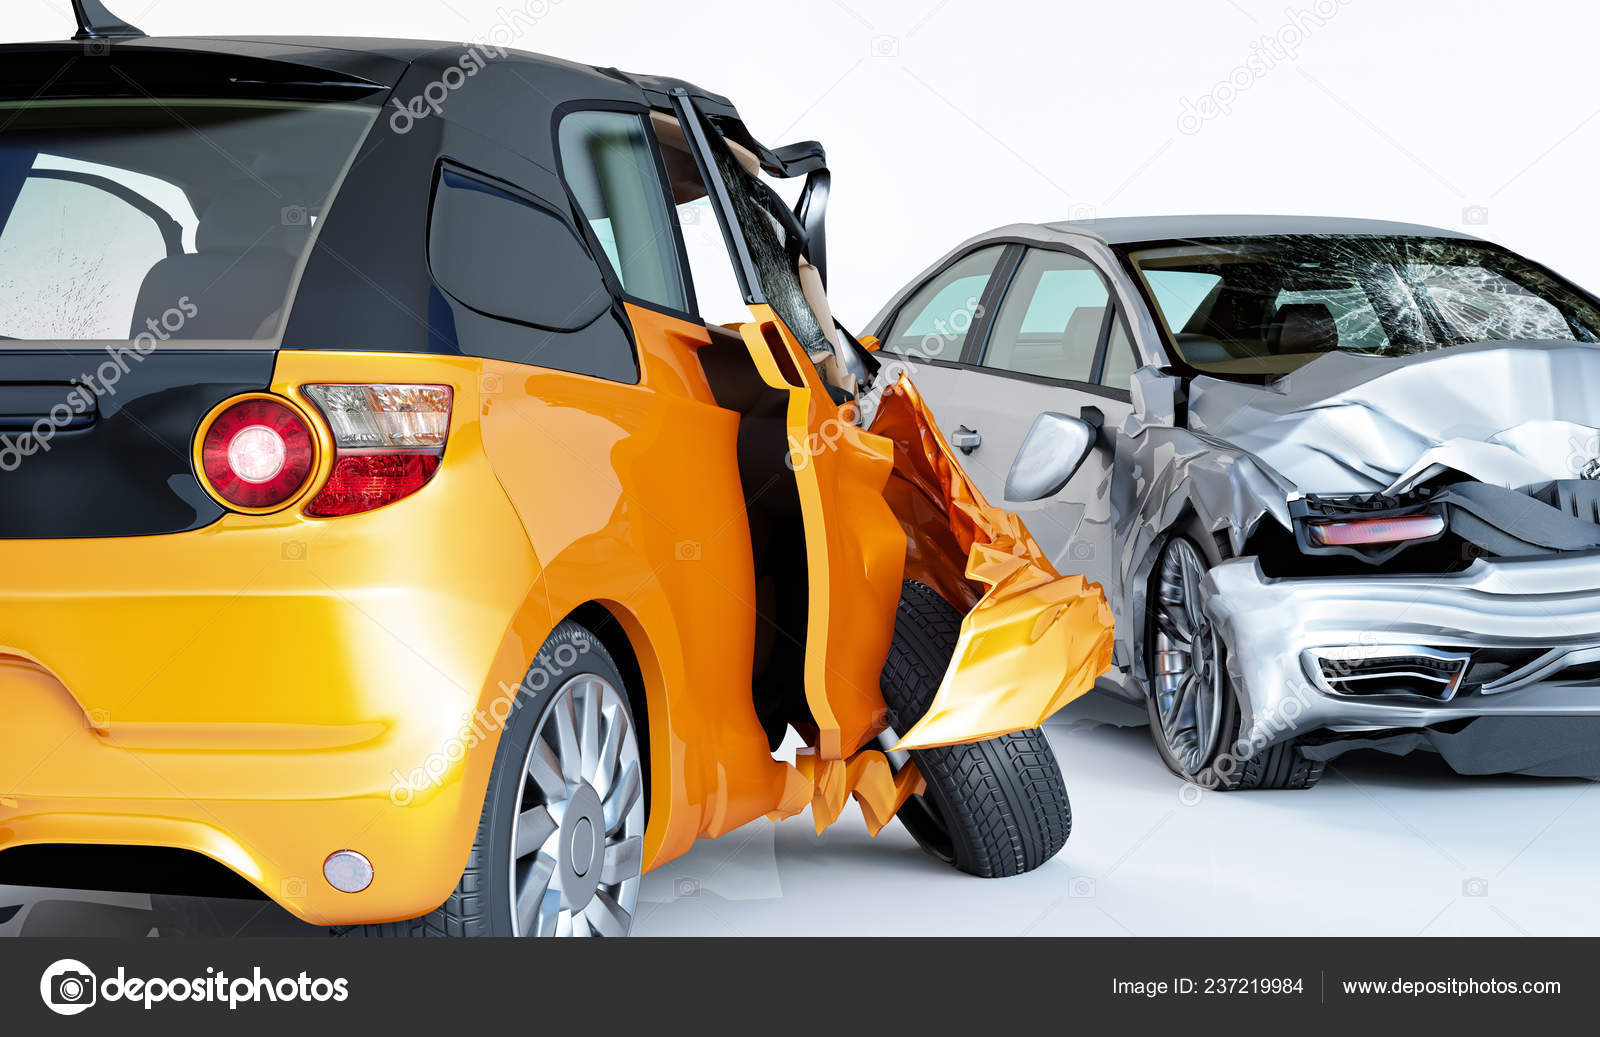 Two Cars Accident Crashed Cars Yellow City Car Foreground Silver